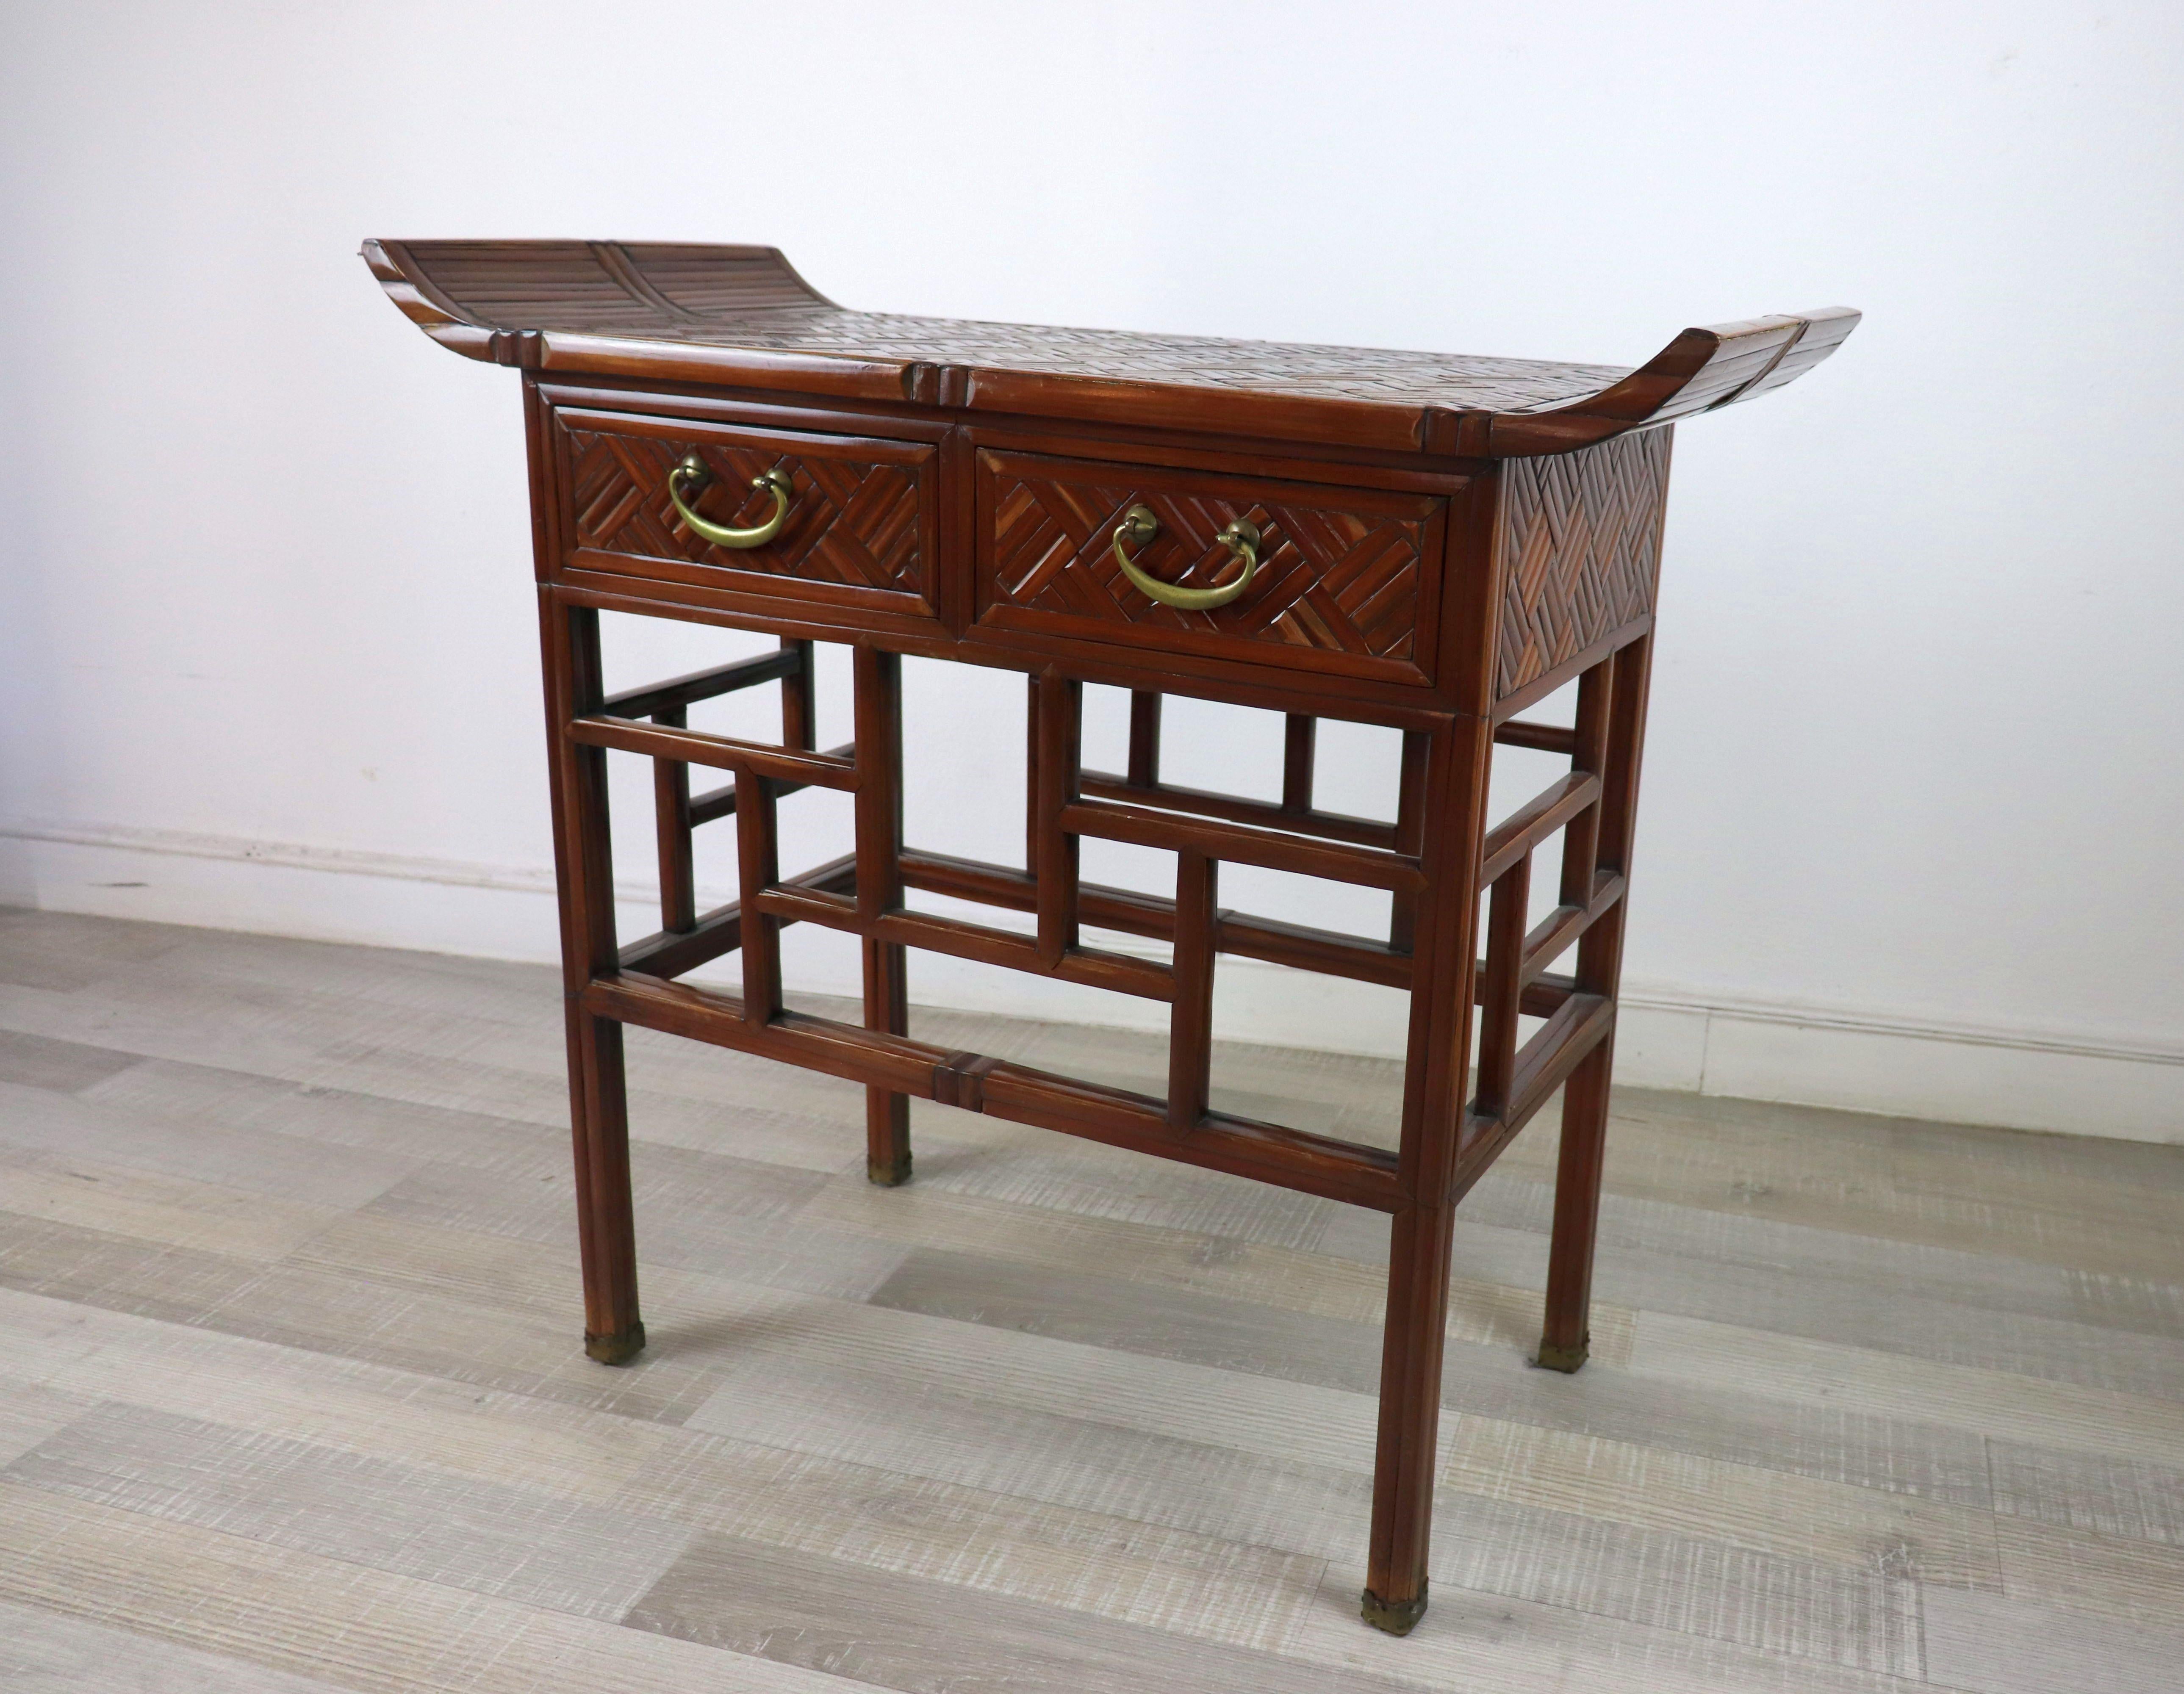 Authentic bamboo table, China, 19th century.